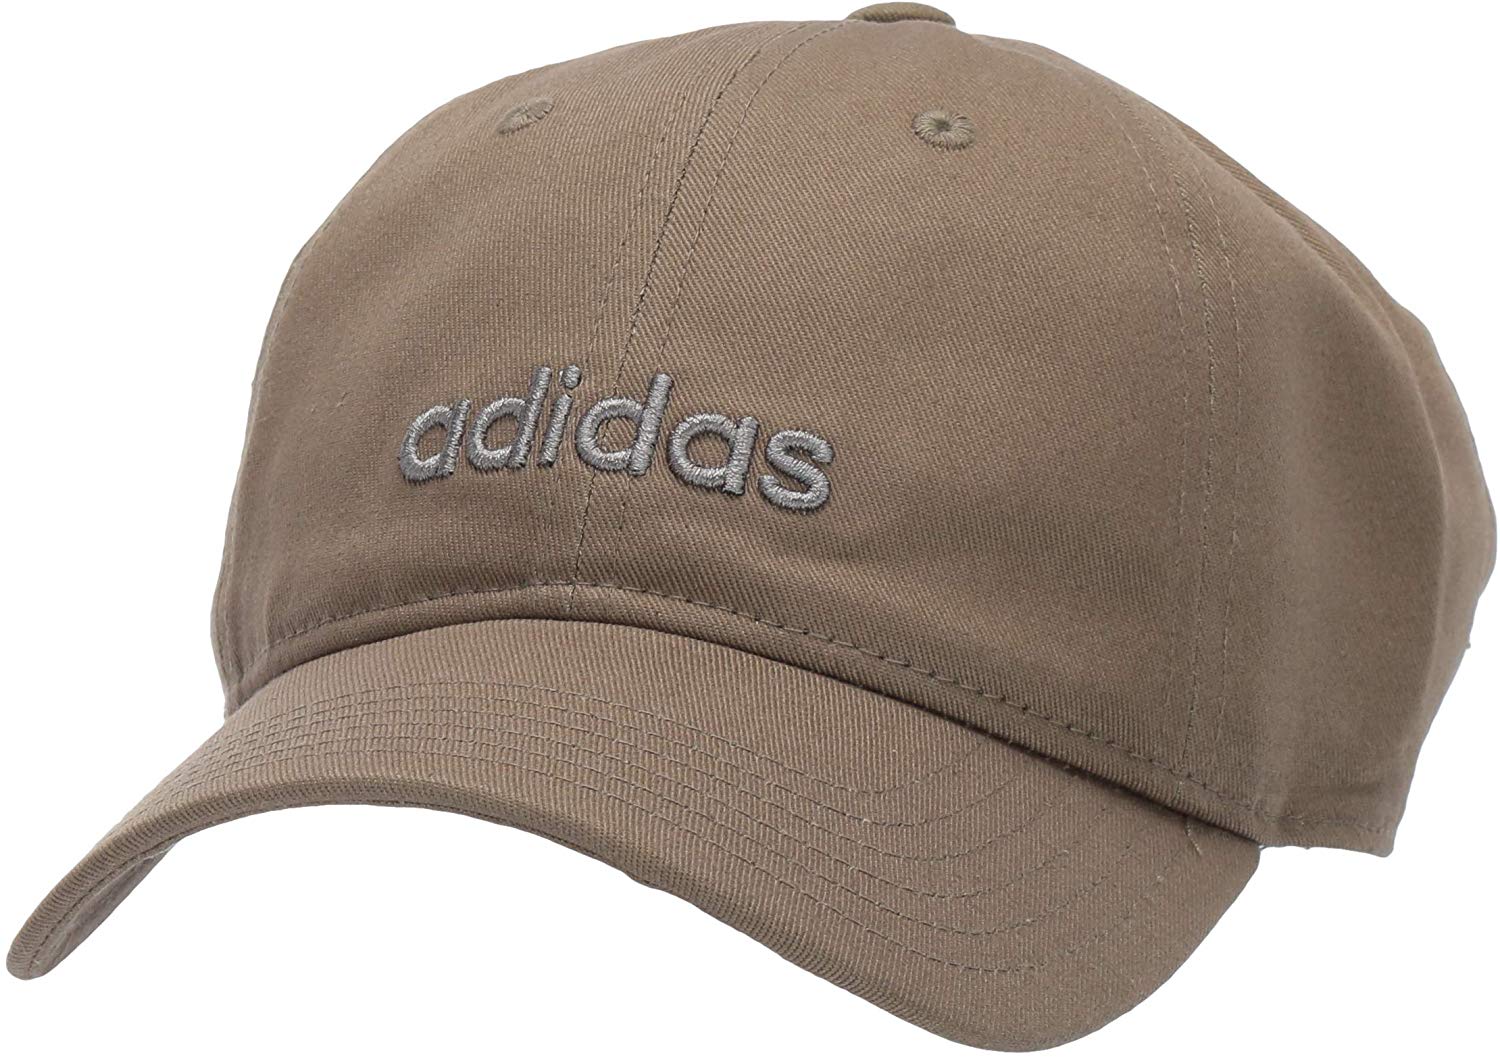 Adidas Womens Contender Relaxed Adjustable Golf Caps